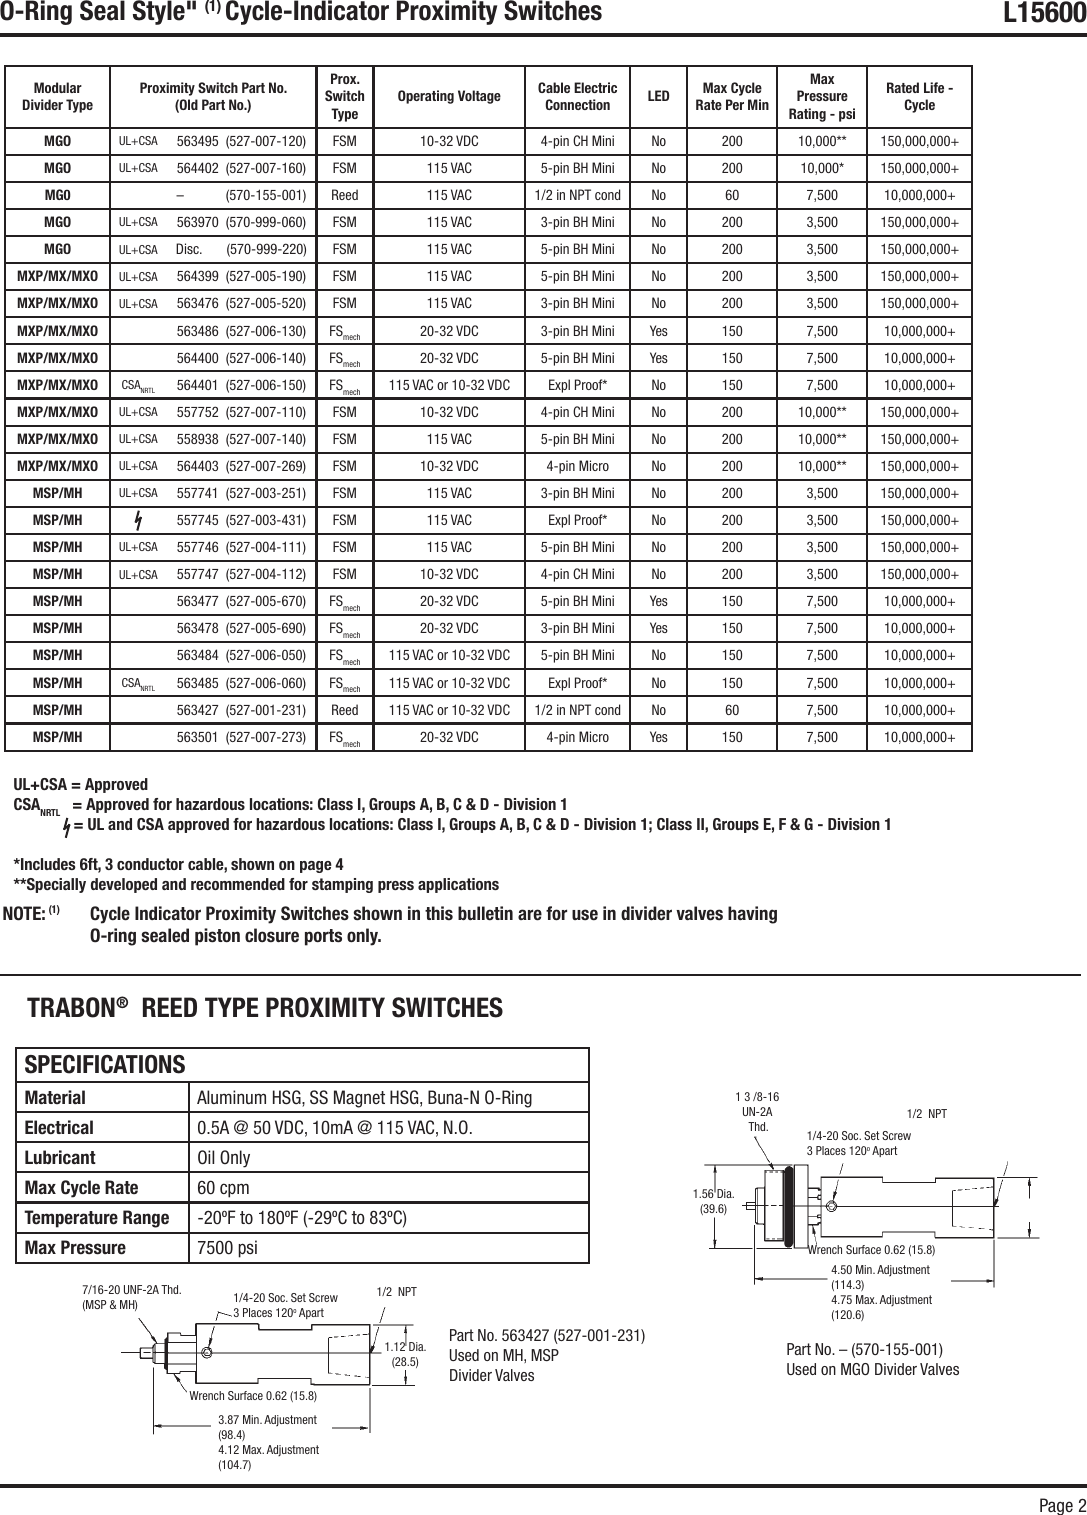 Page 2 of 4 - Graco Graco-Cycle-Indicator-Proximity-Switches-Users-Manual-  Graco-cycle-indicator-proximity-switches-users-manual